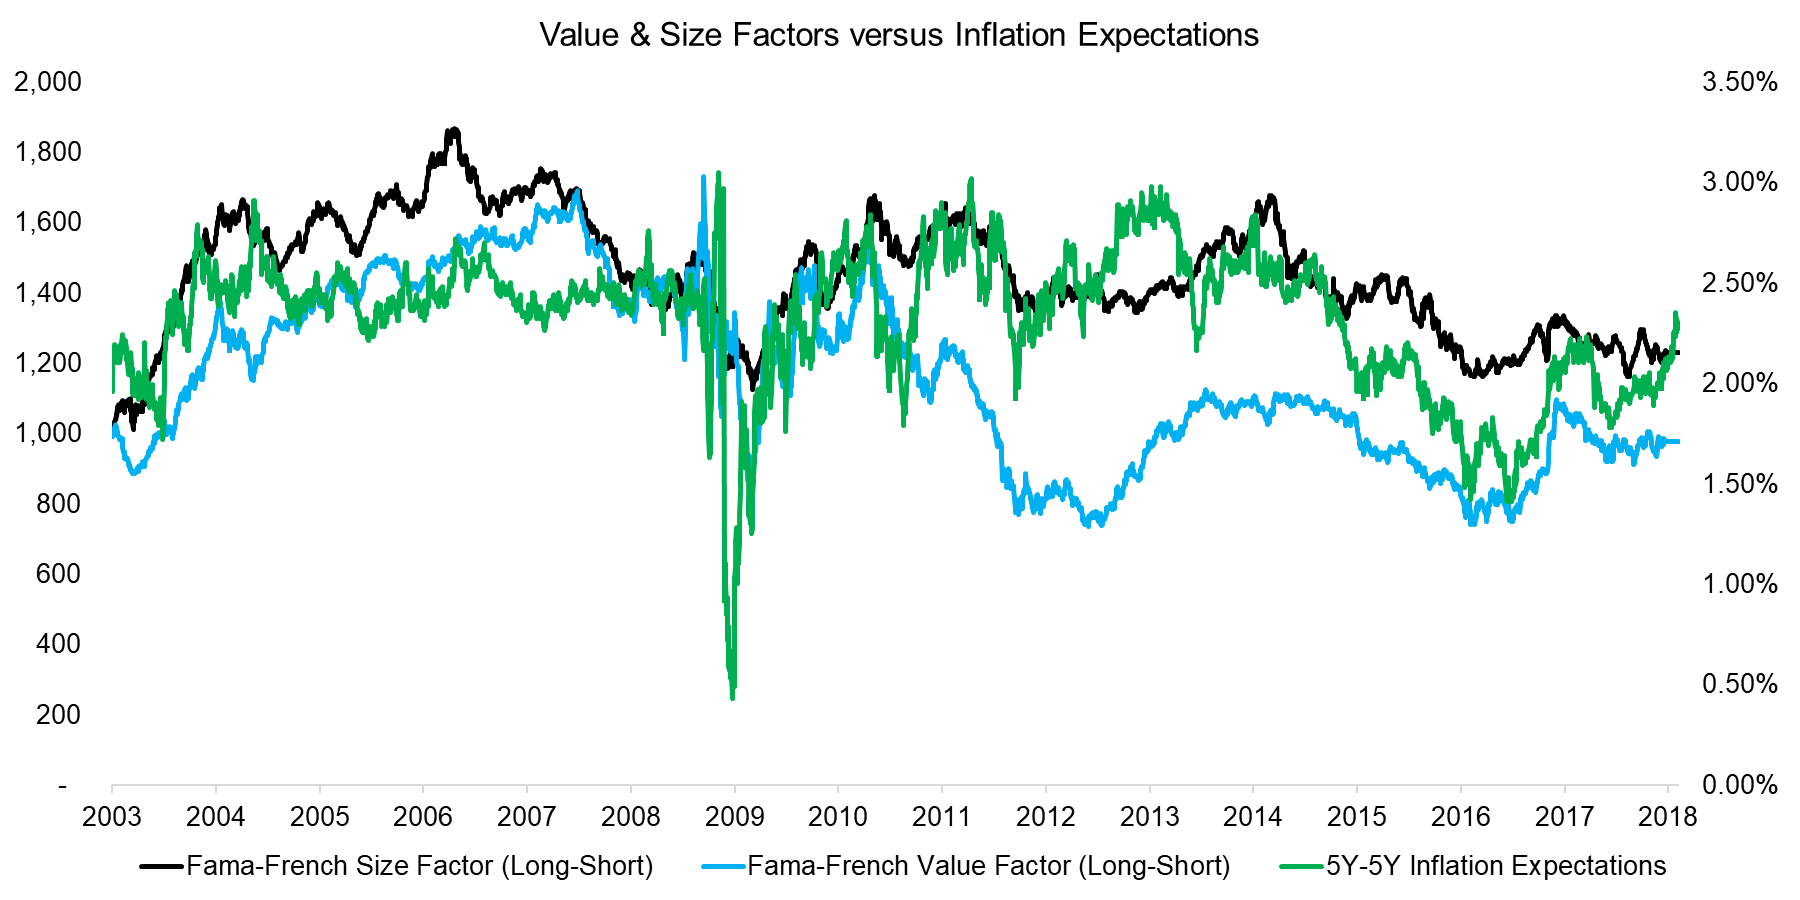 Value & Size Factors versus Inflation Expectations